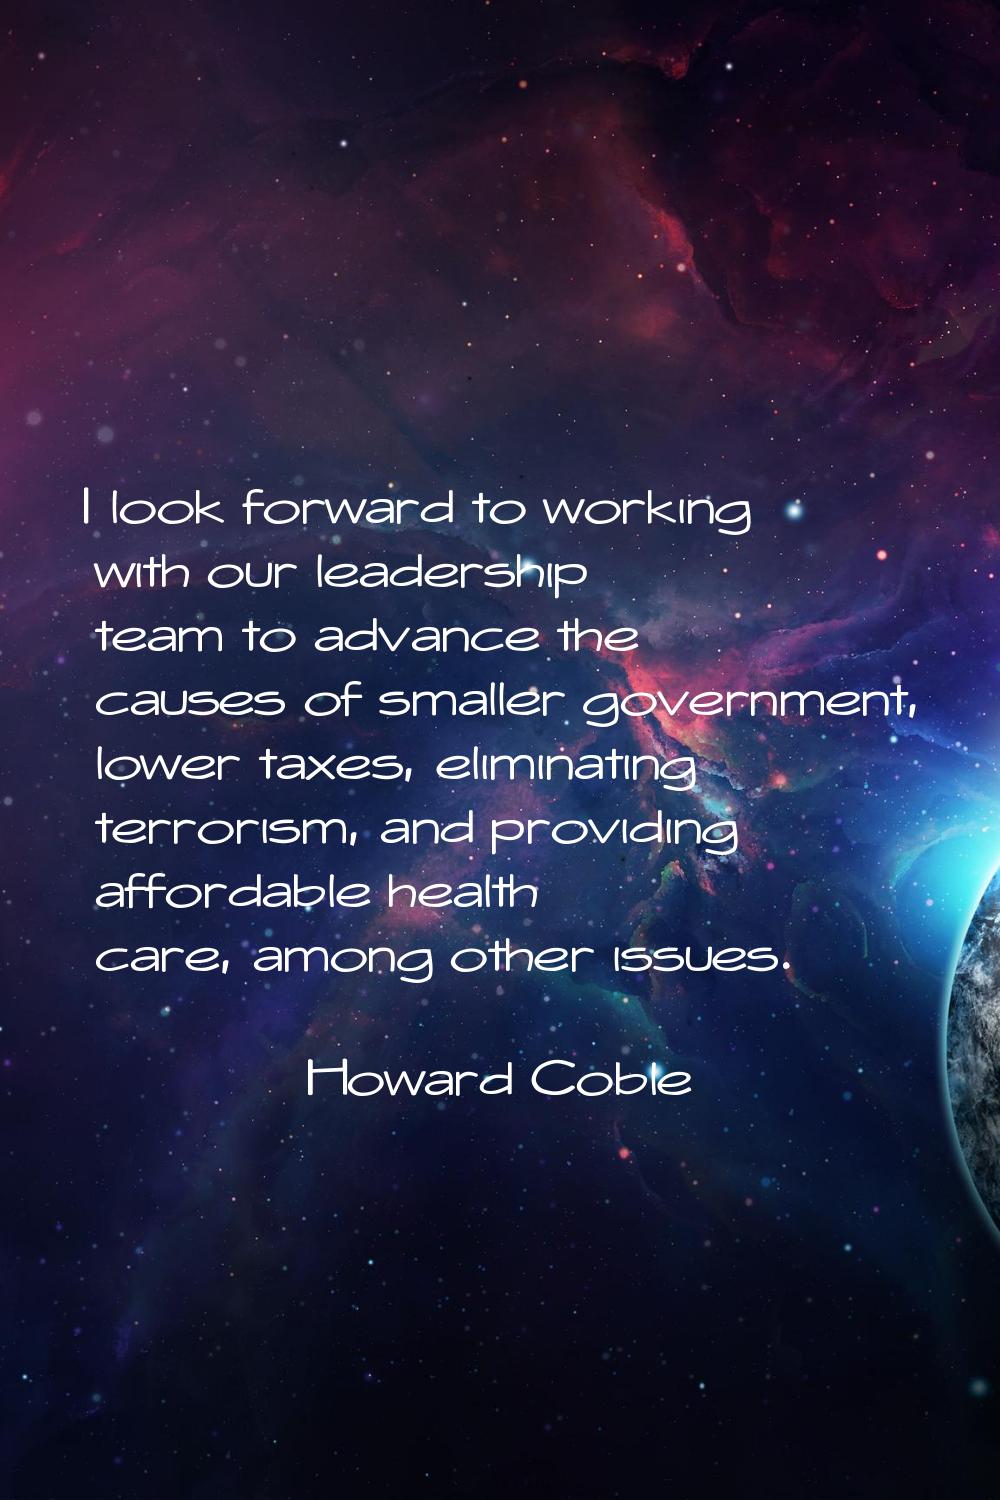 I look forward to working with our leadership team to advance the causes of smaller government, low